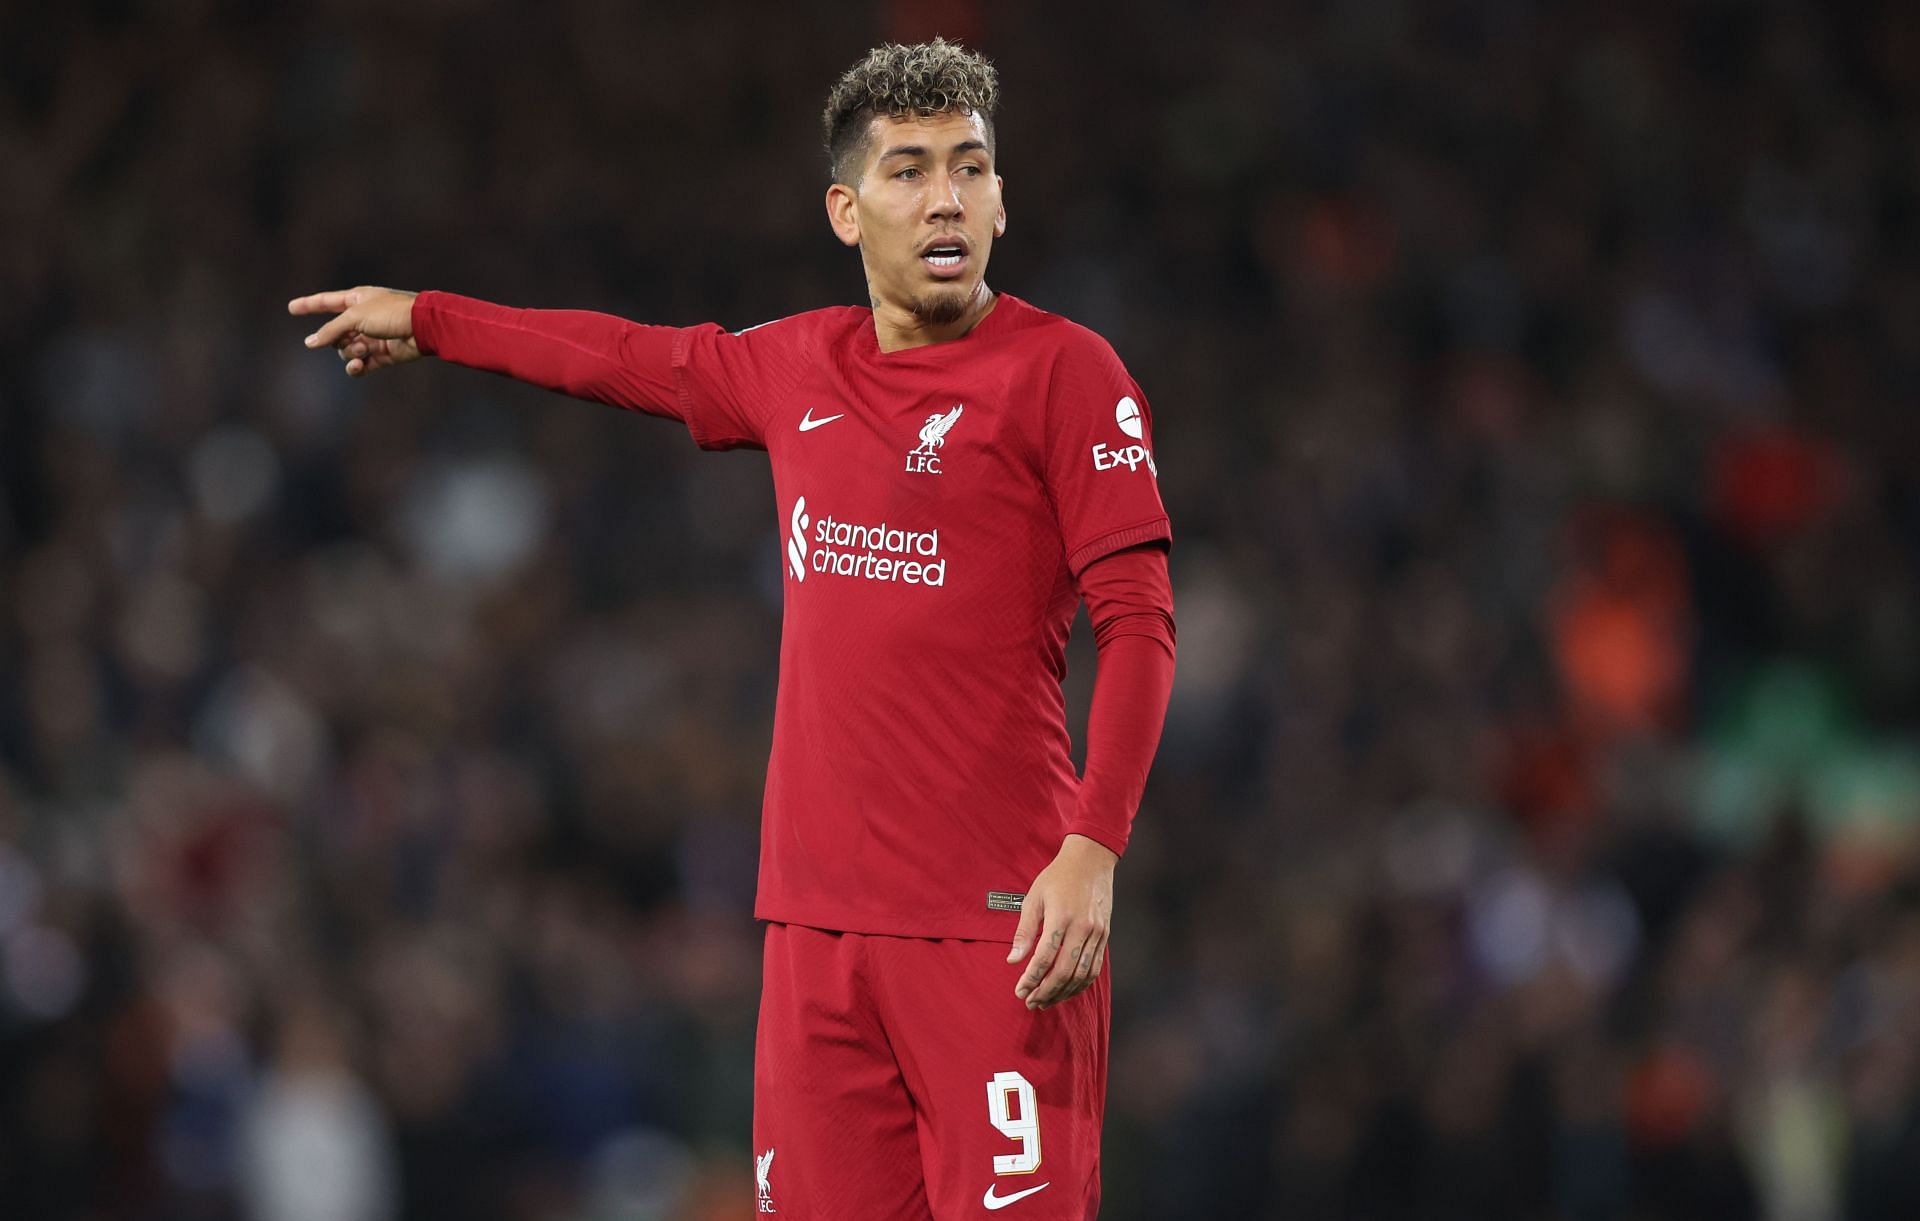 Firmino could join Real Madrid as a free agent.